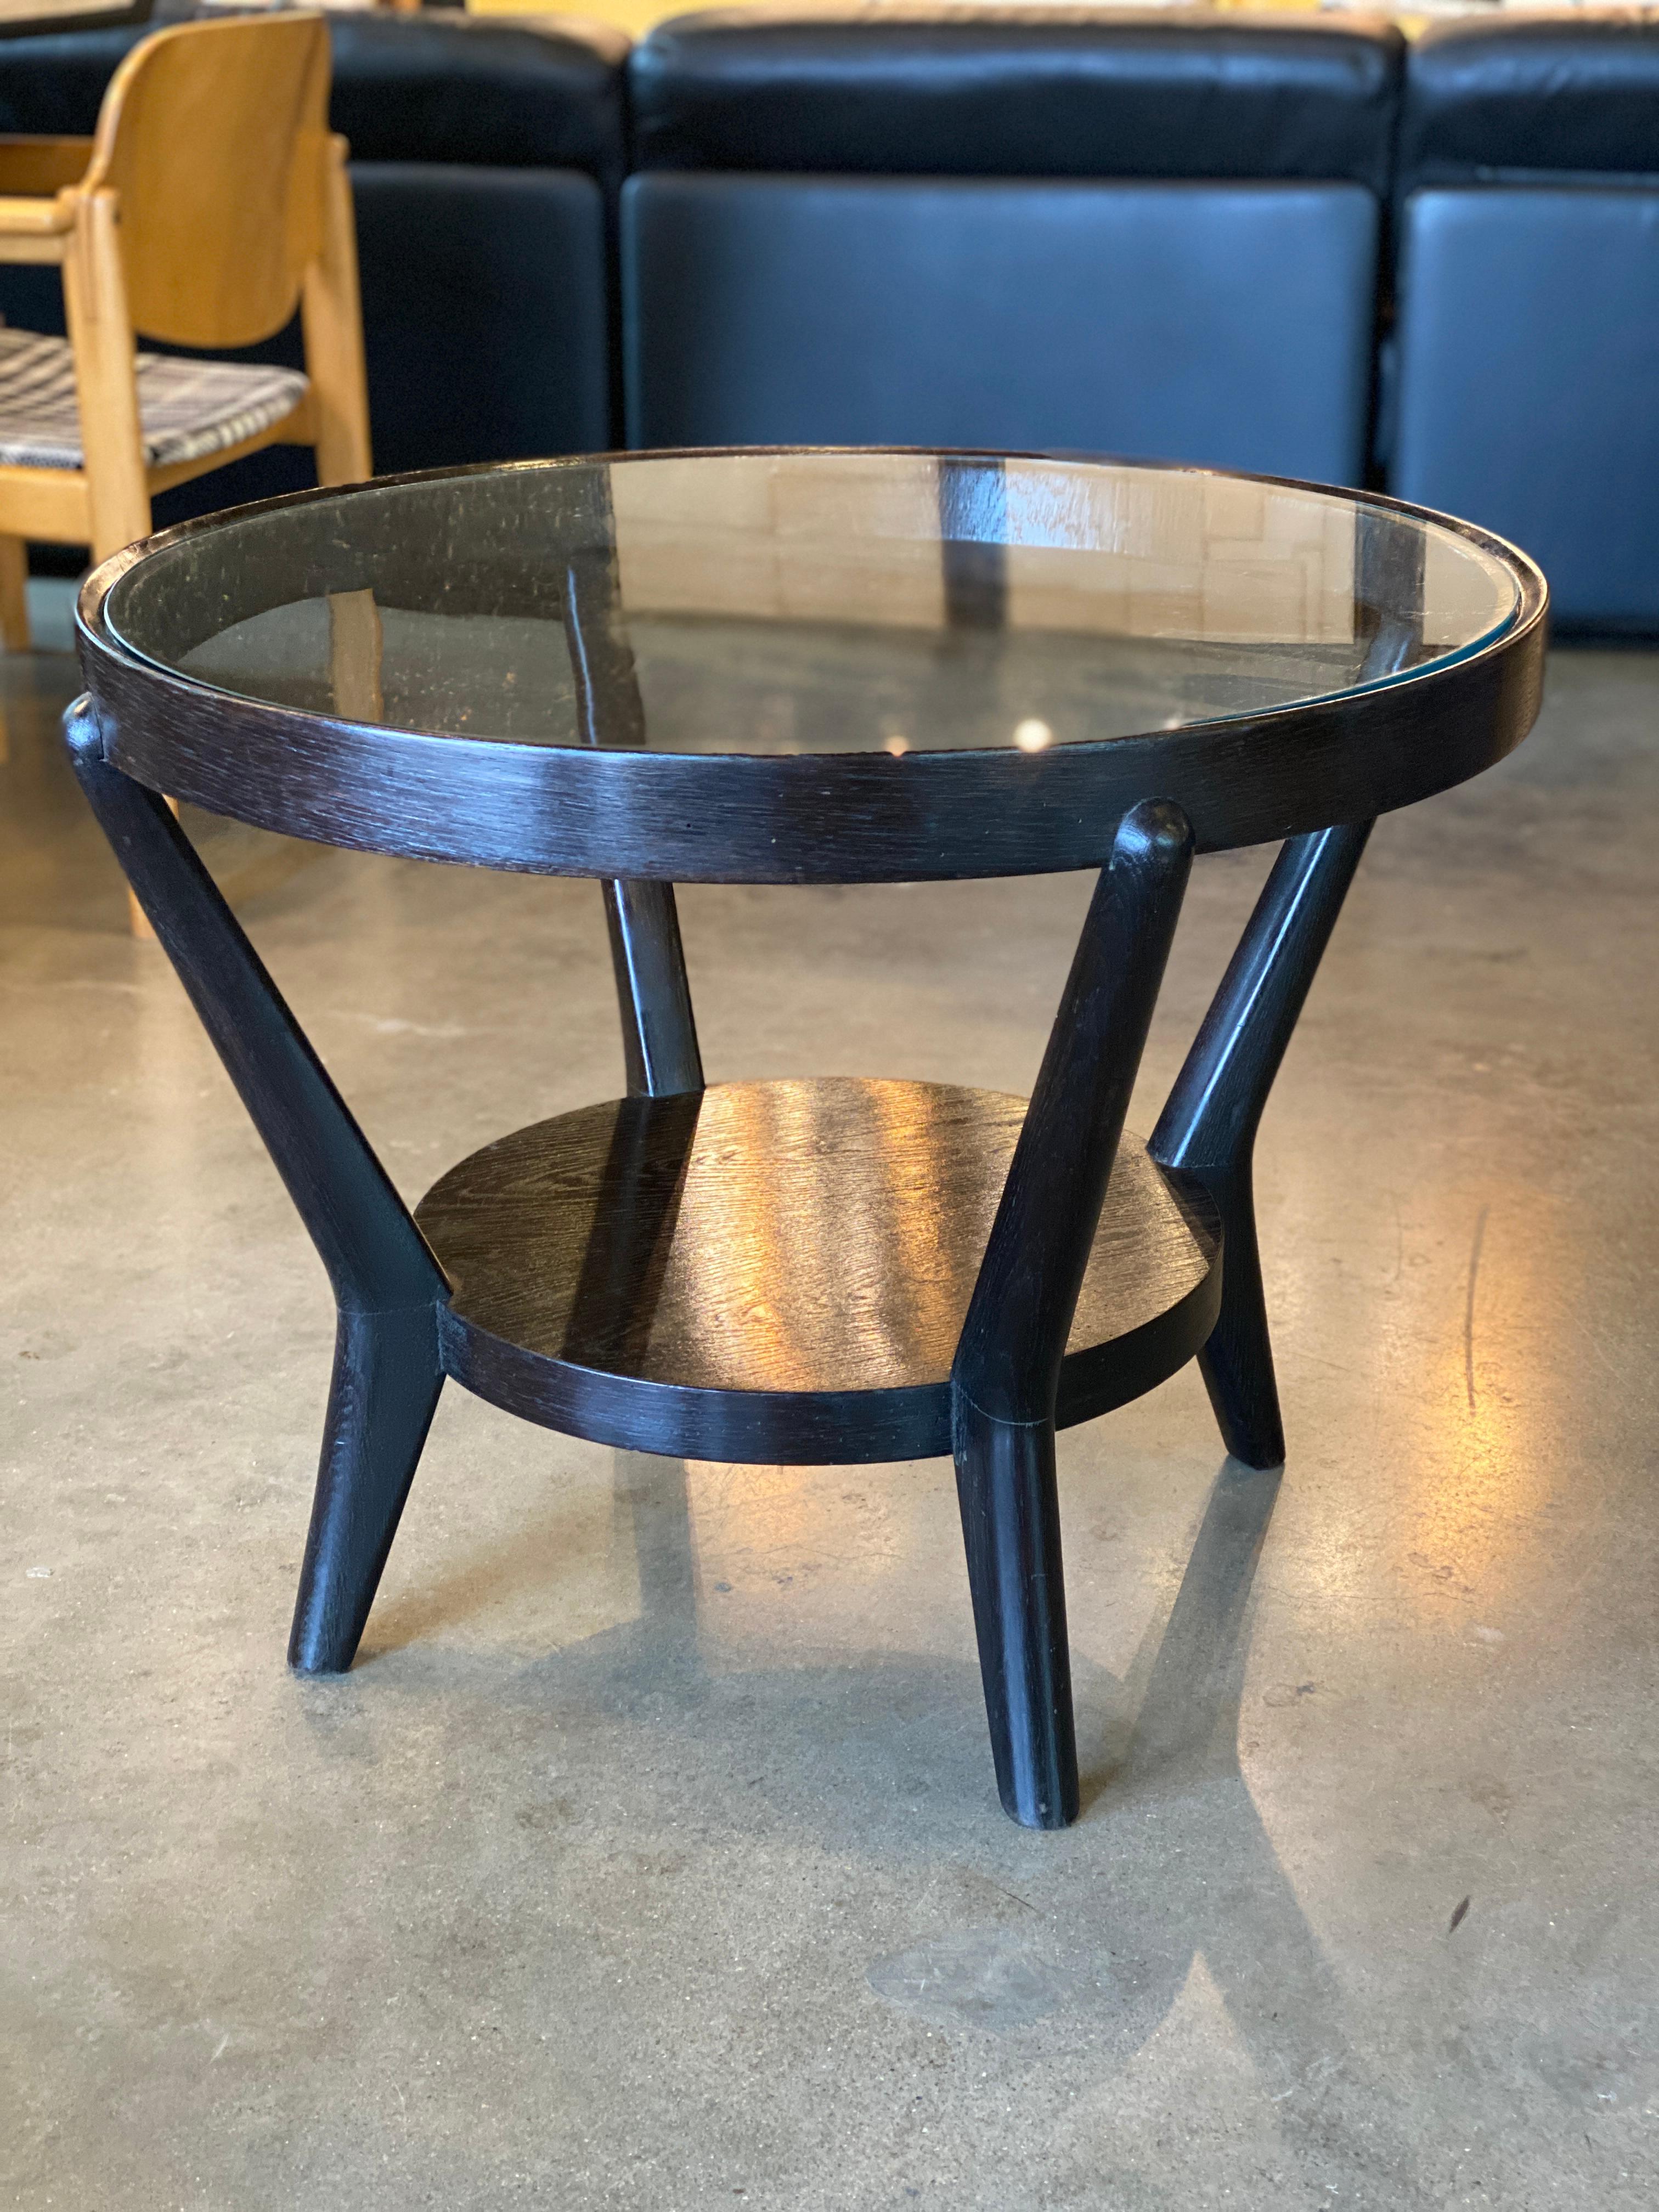 European Art Deco Side Table with Ebonized Wood and Glass, 1930s